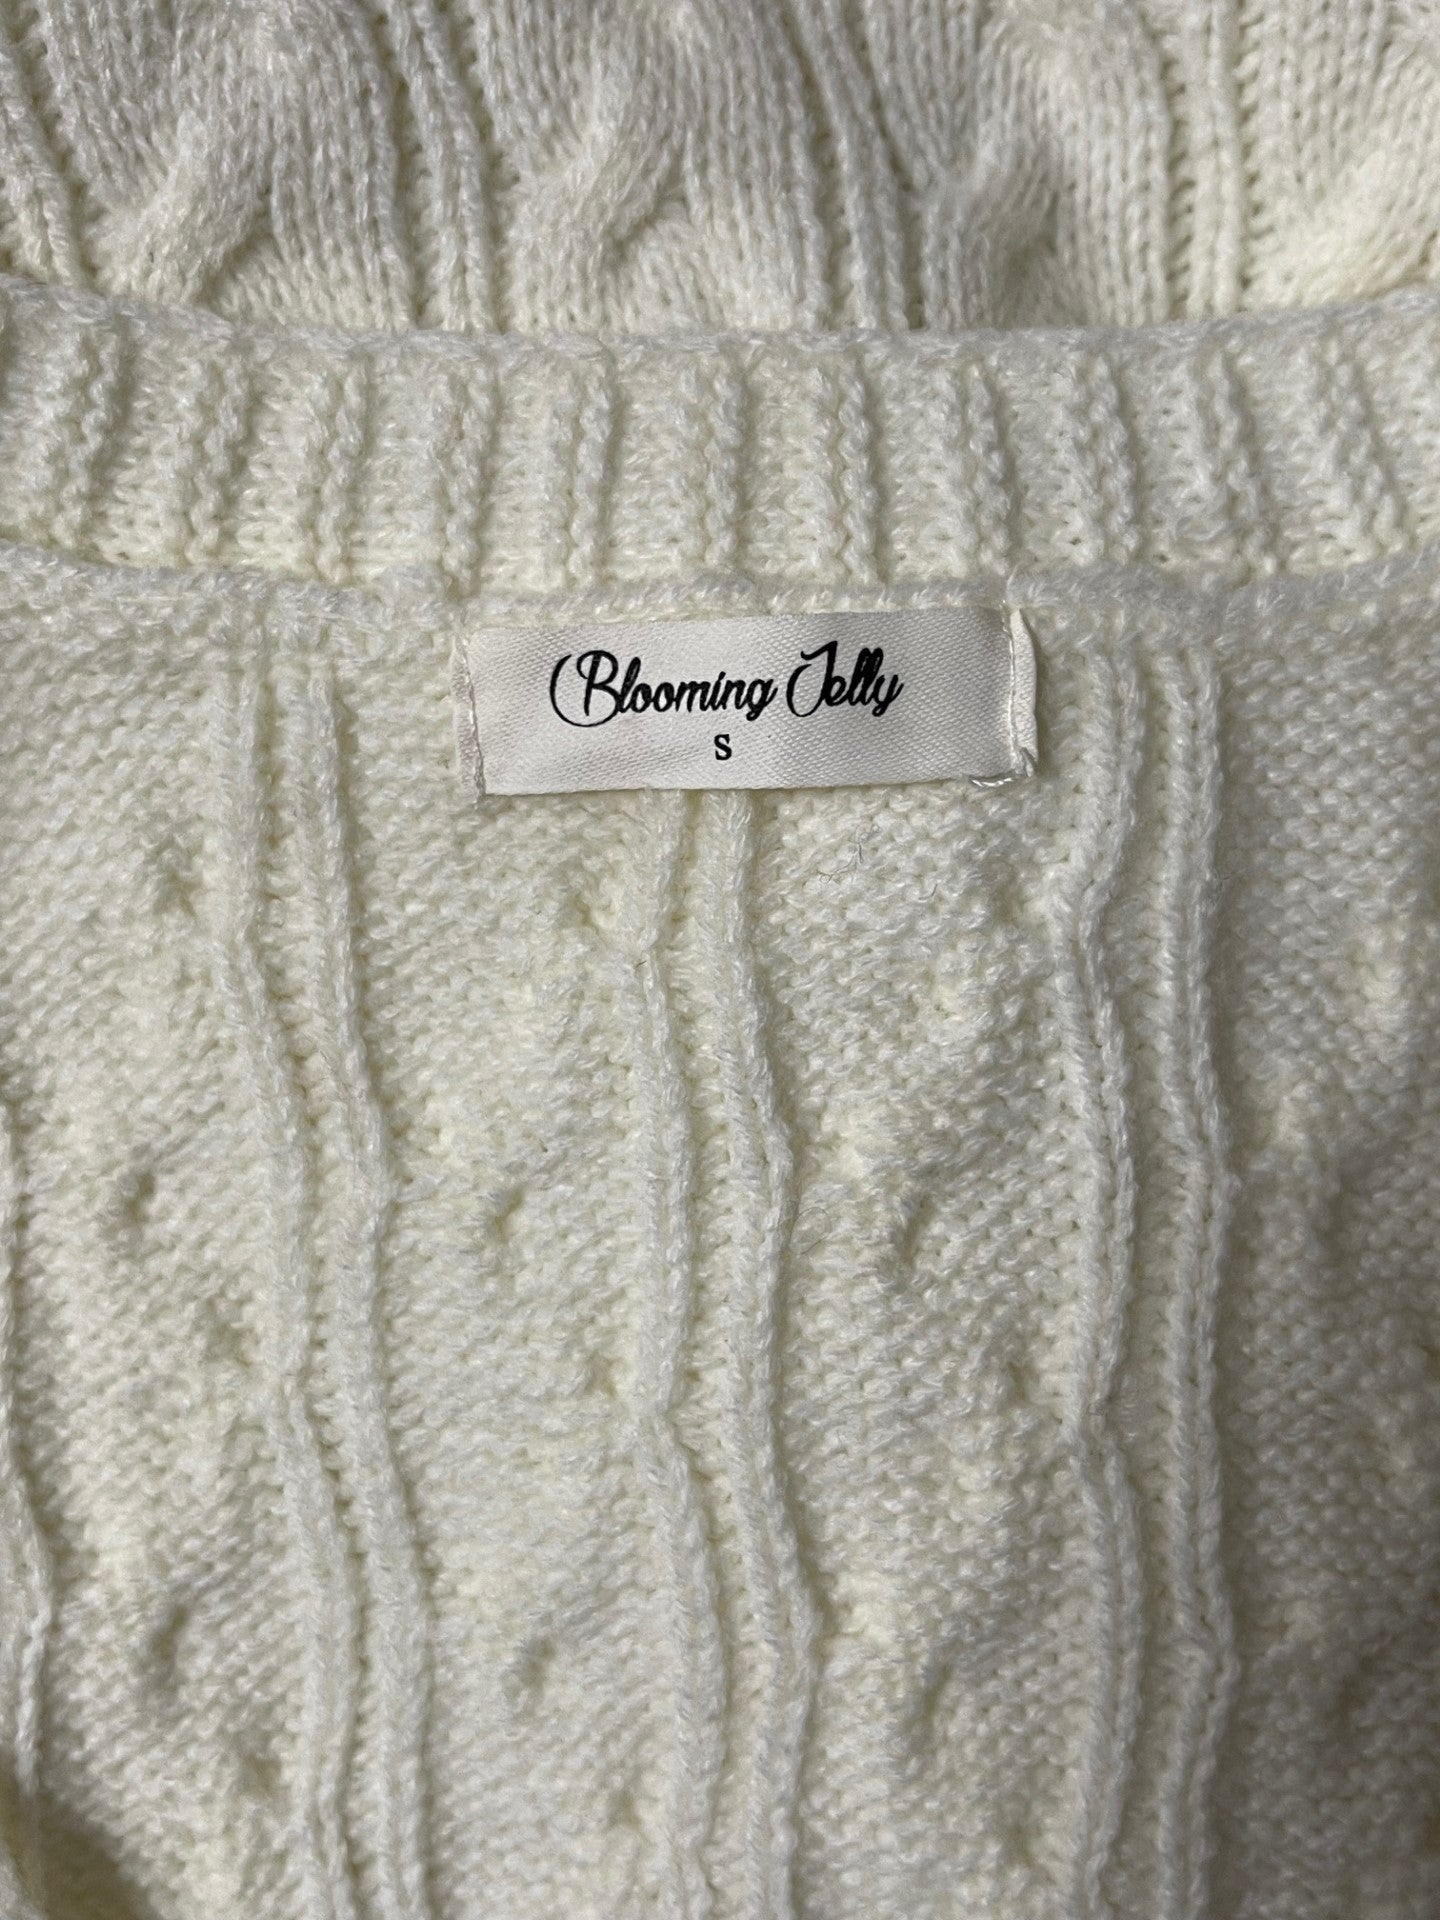 Blooming Jelly Cream Cardigan Small